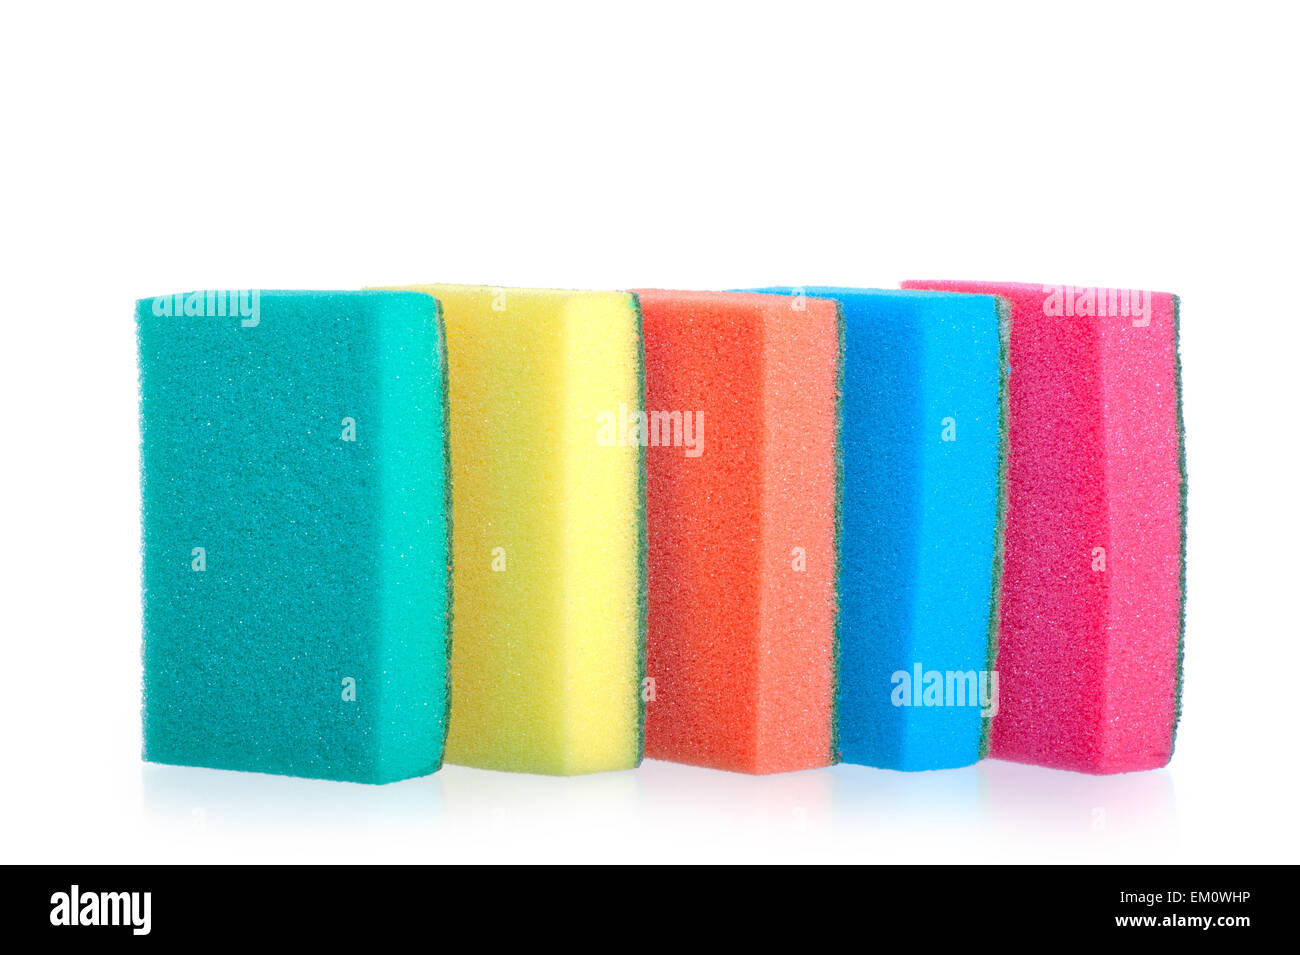 colorful sponges for washing dishes stand in a row Stock Photo